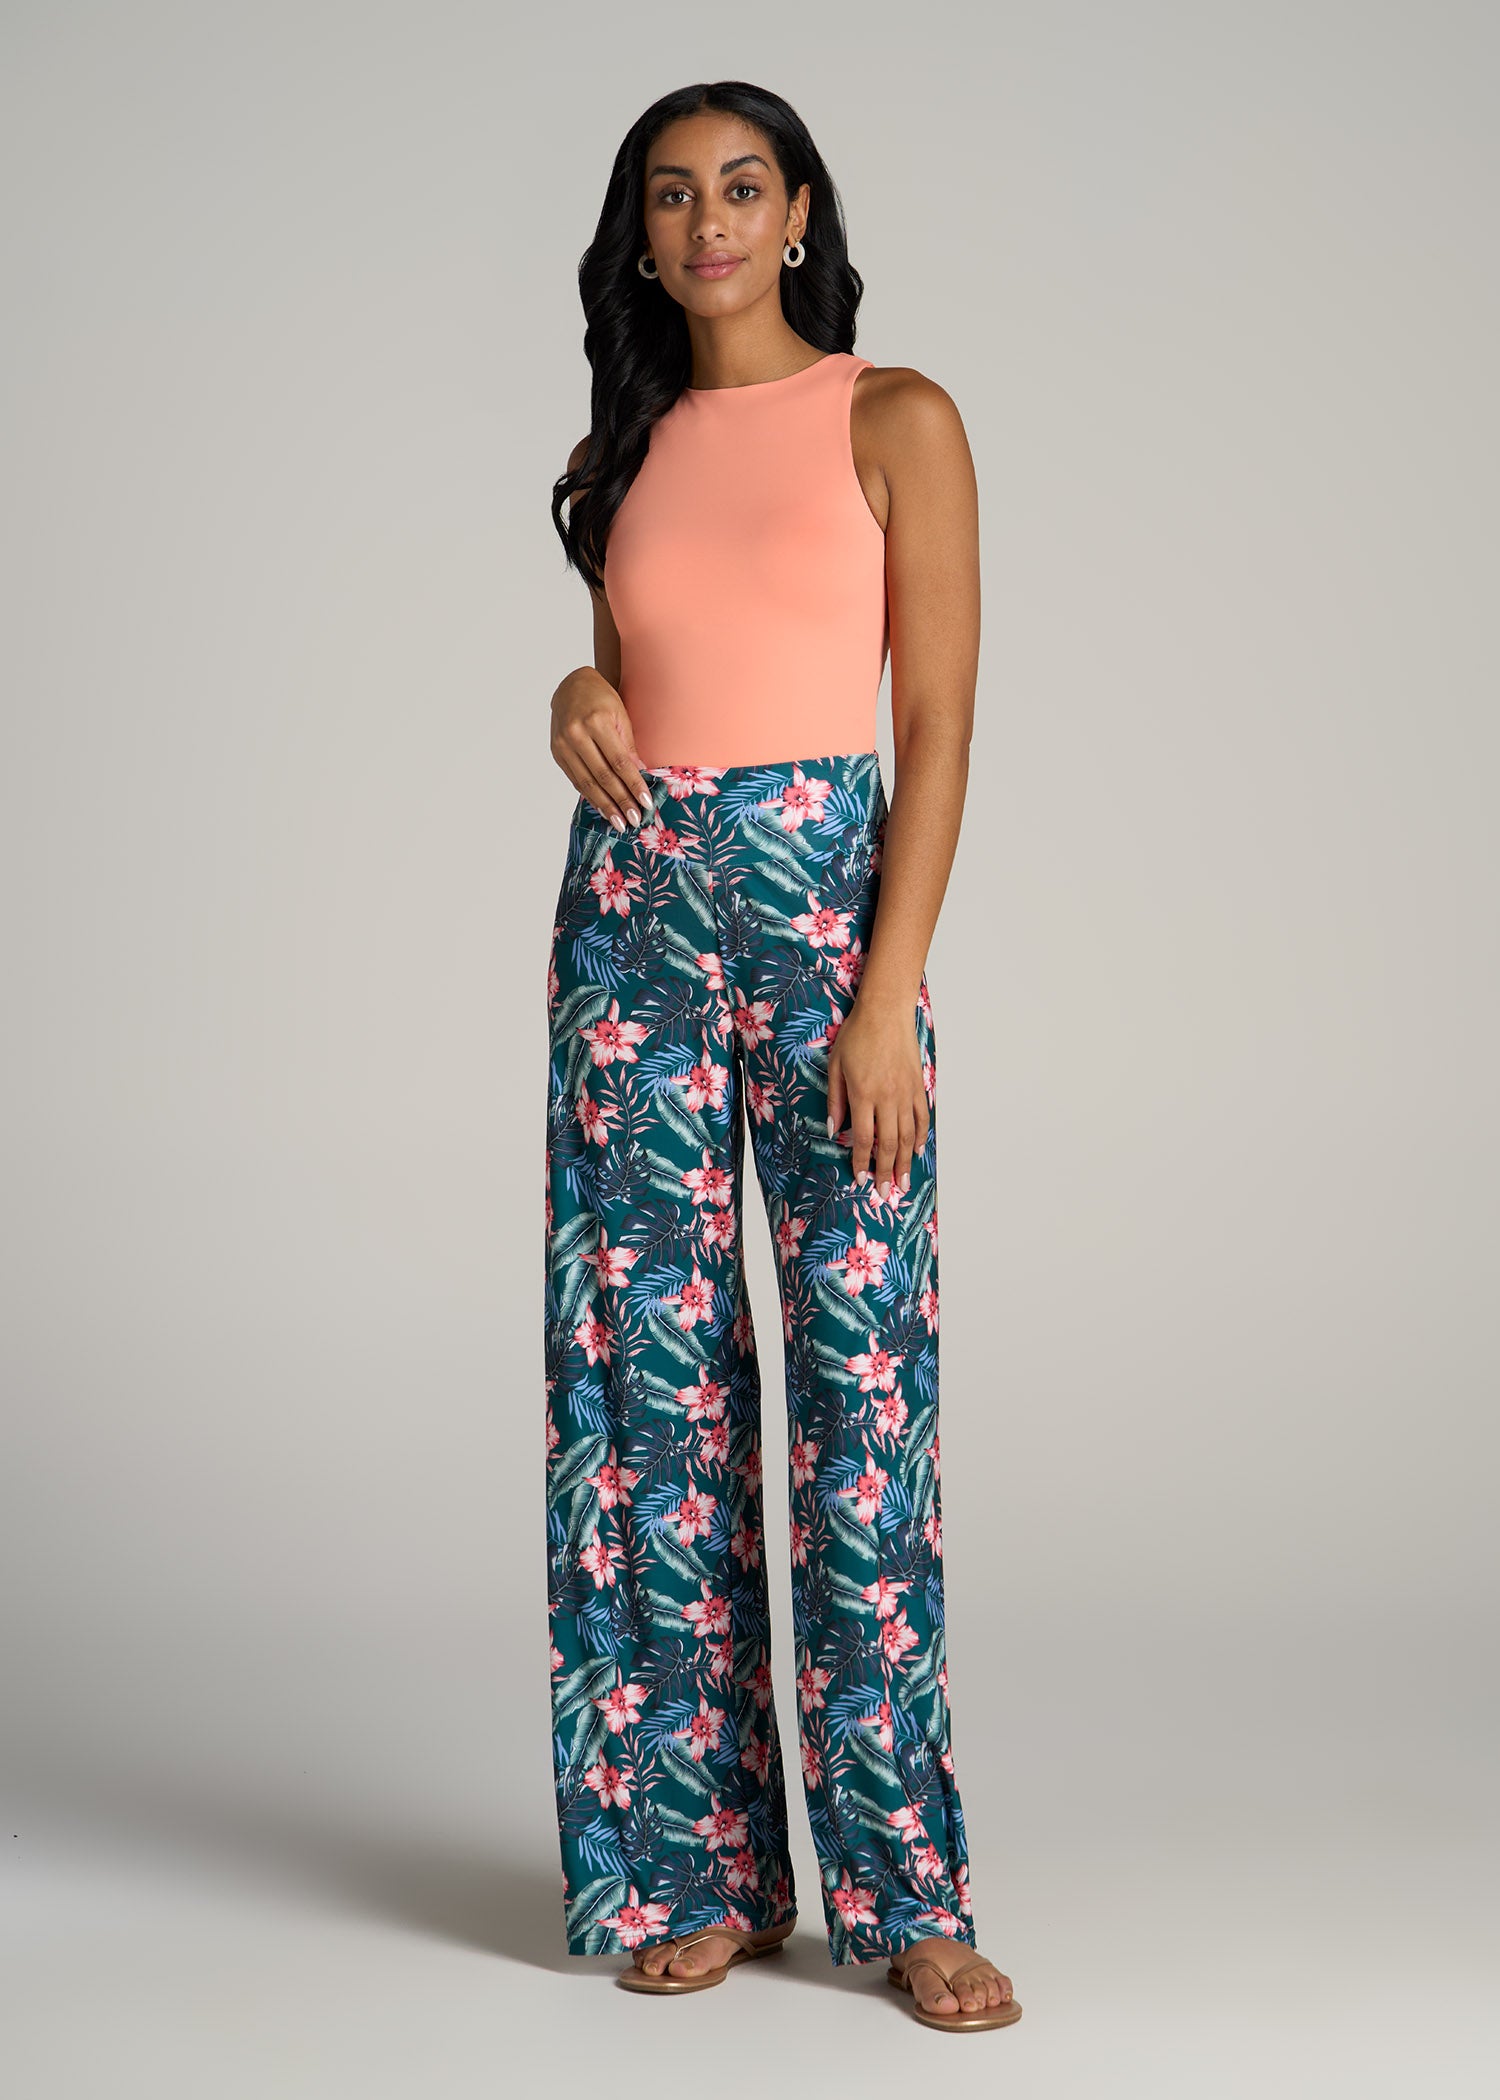 Flowy, Printed Pants for Easy Breezy Summer Dressing